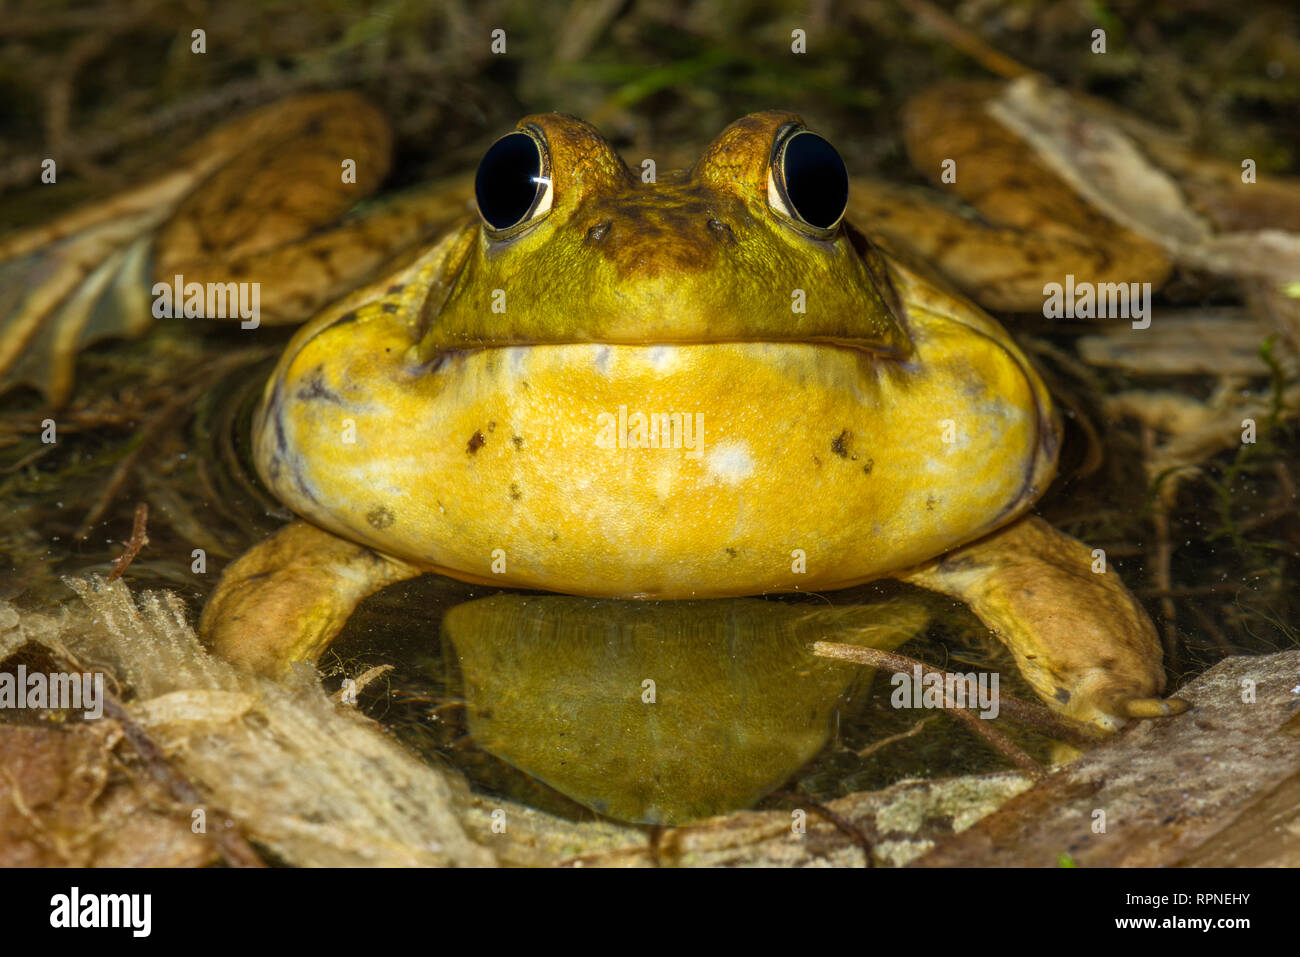 Zoologie/Tiere, Amphibien (Amphibia), Green Frog (Rana clamitans) mit Vocal sac aufgeblasen während Cho, Additional-Rights - Clearance-Info - Not-Available Stockfoto